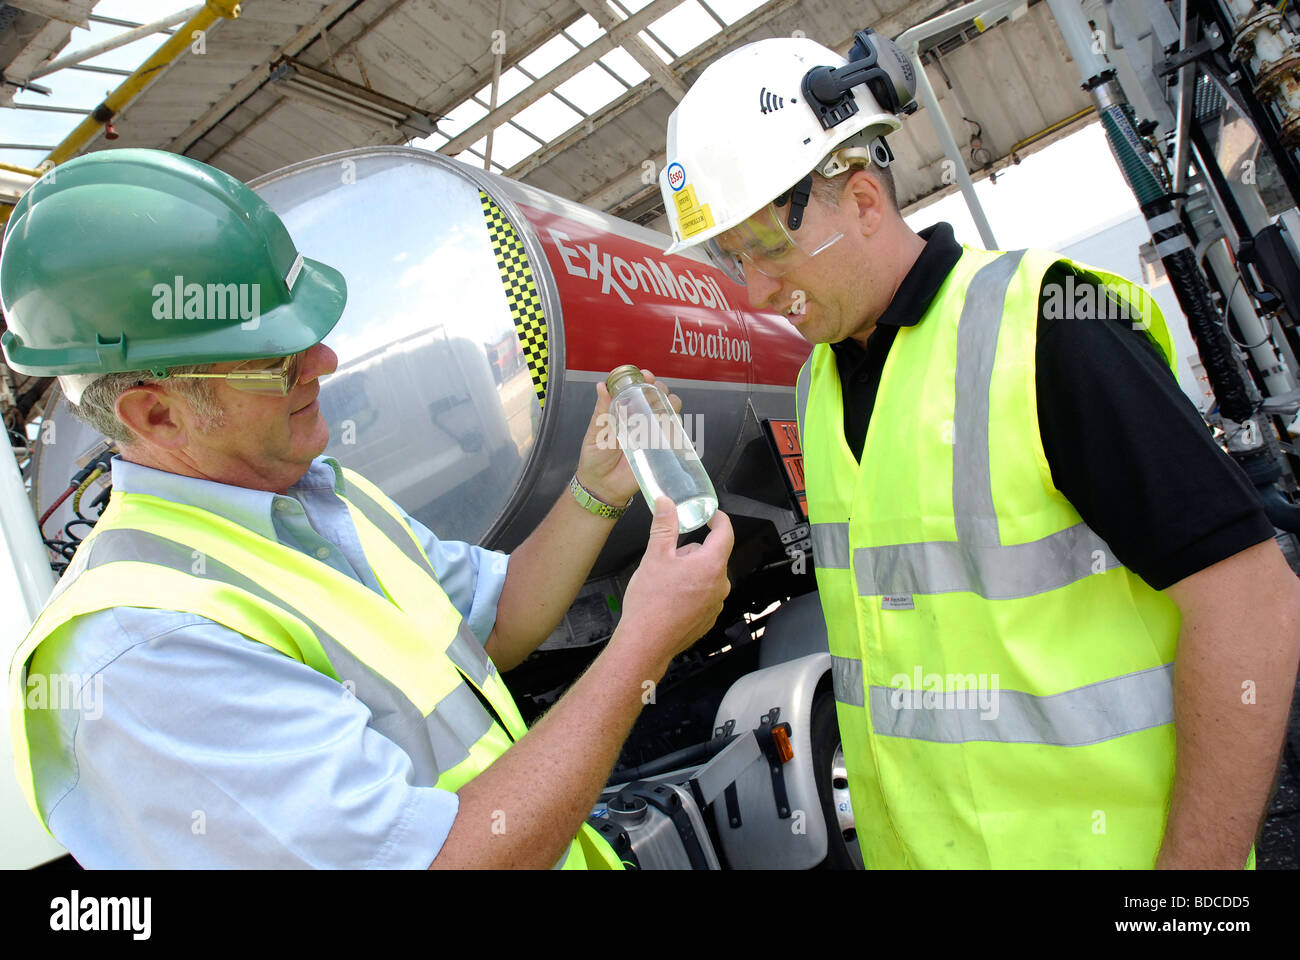 Technicians checking a sample of aviation fuel Stock Photo